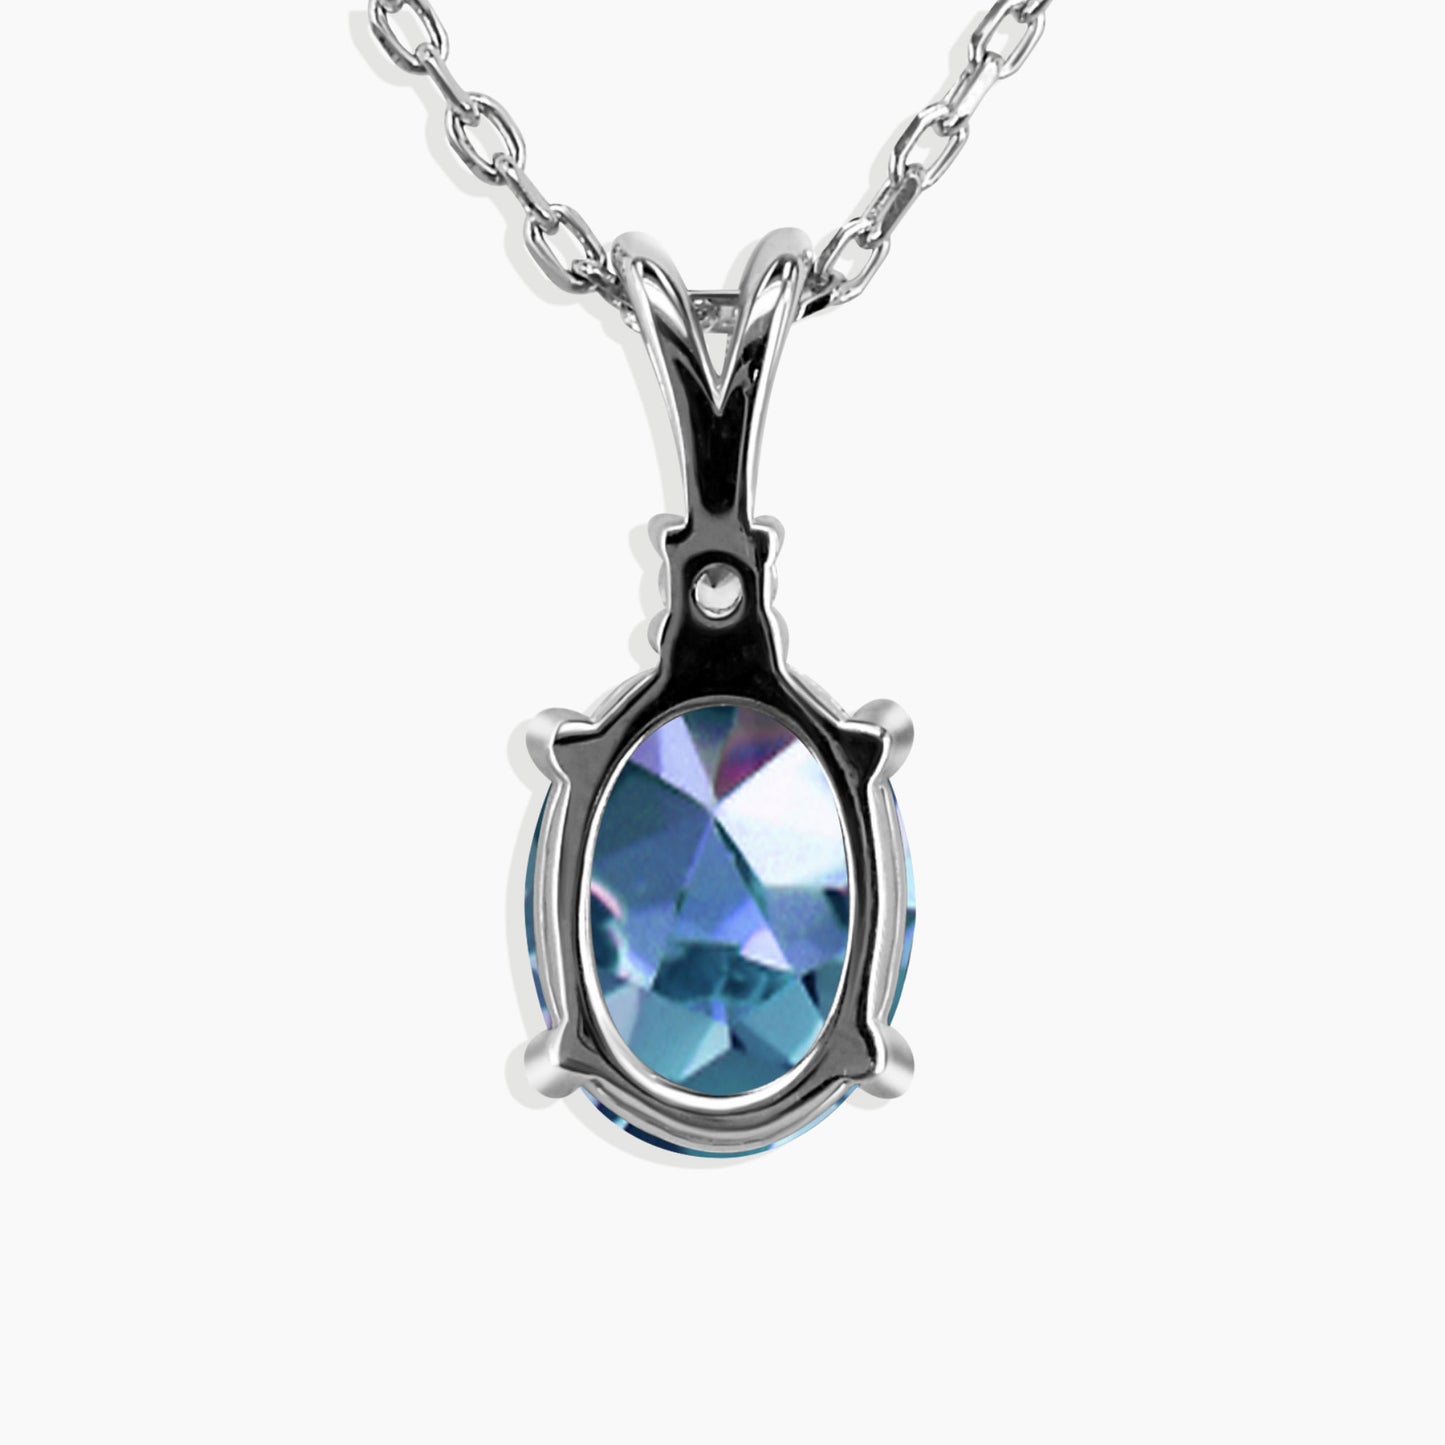 Alexandrite Oval Shape Pendant Necklace in Sterling Silver